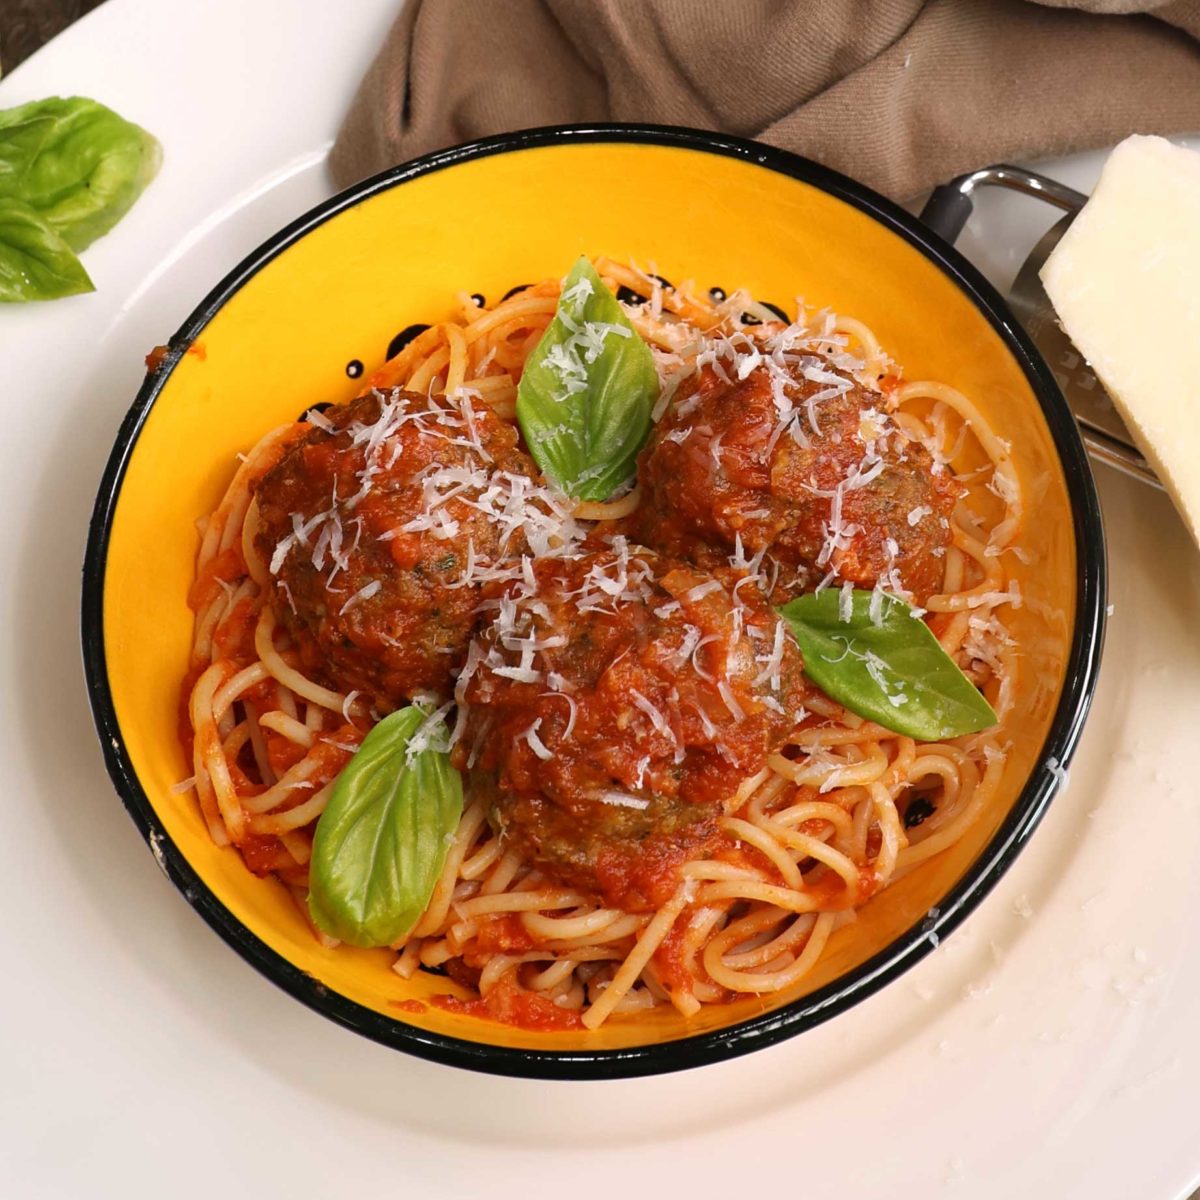 a yellow bowl filled with spaghetti and meatballs next to a wedge of fresh parmesan cheese and a brown napkin.